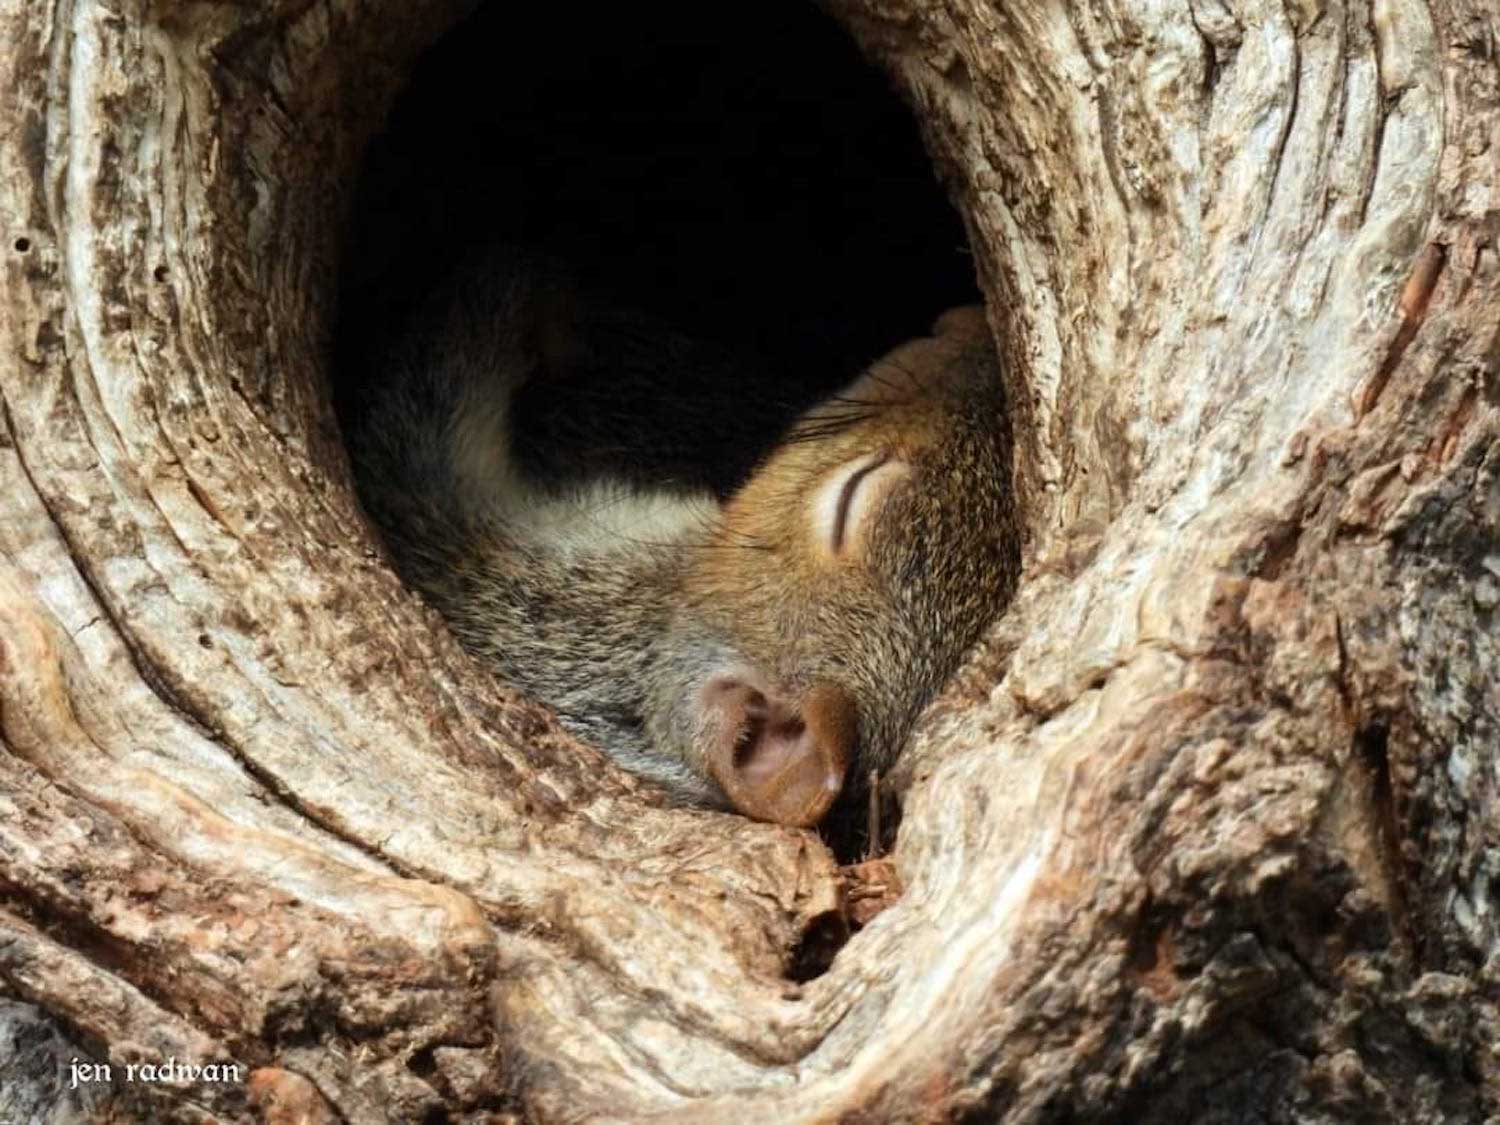 A young squirrel sleeping in a tree cavity.